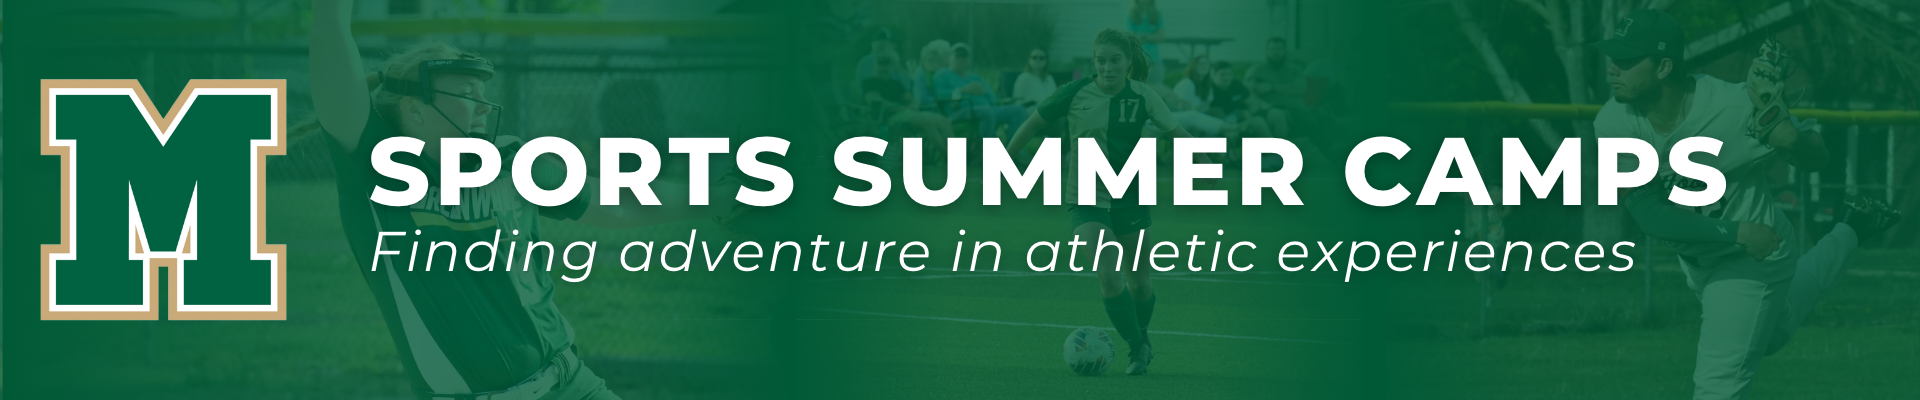 Sports Summer Camps - Finding Adventure in Athletic Experiences